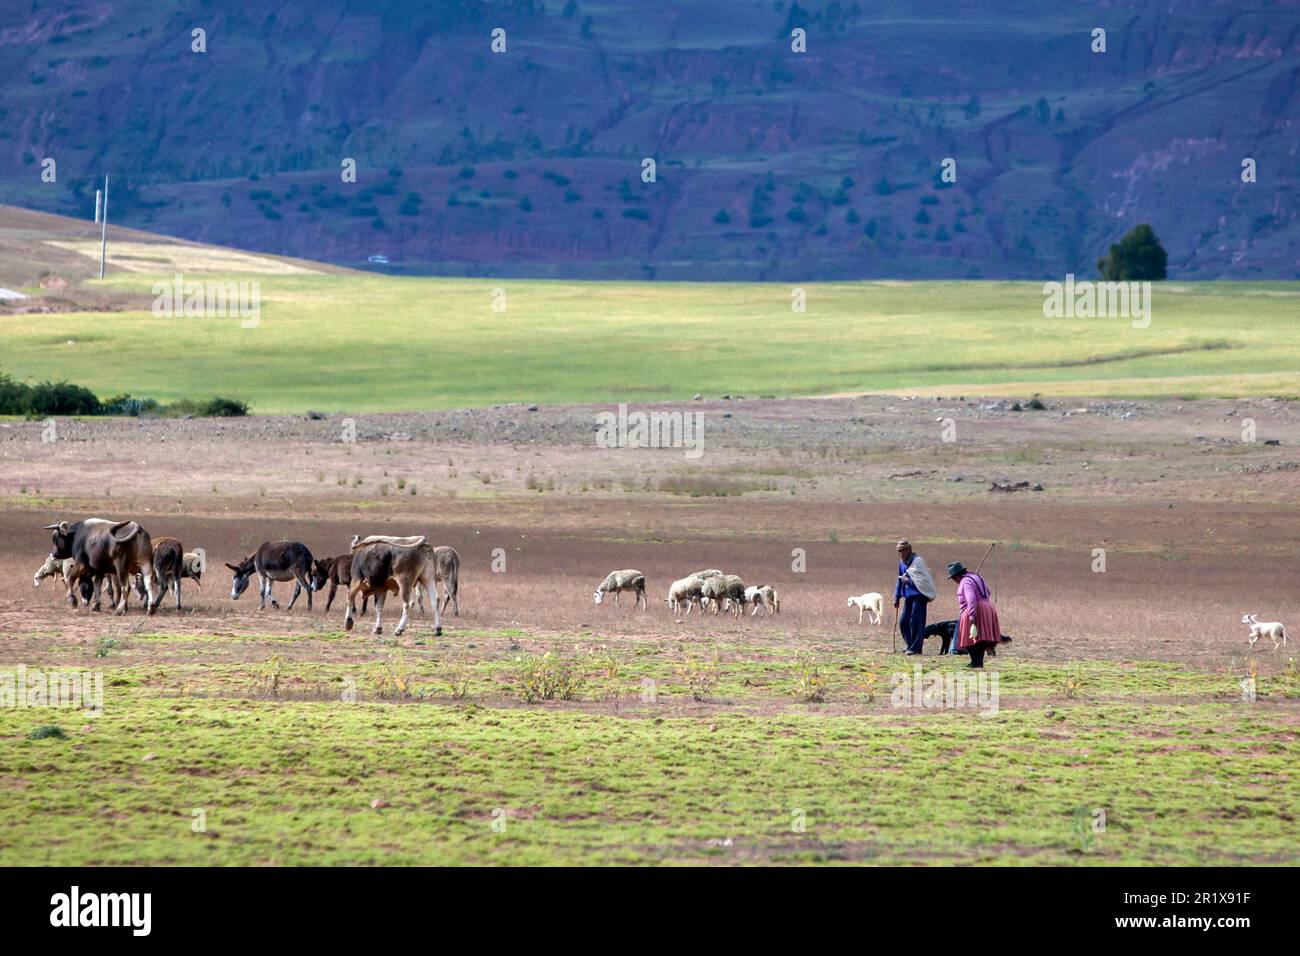 A man and woman walking with their flock of sheep, cattle and donkeys as the animals graze on a plateau at Maras in Peru. Stock Photo